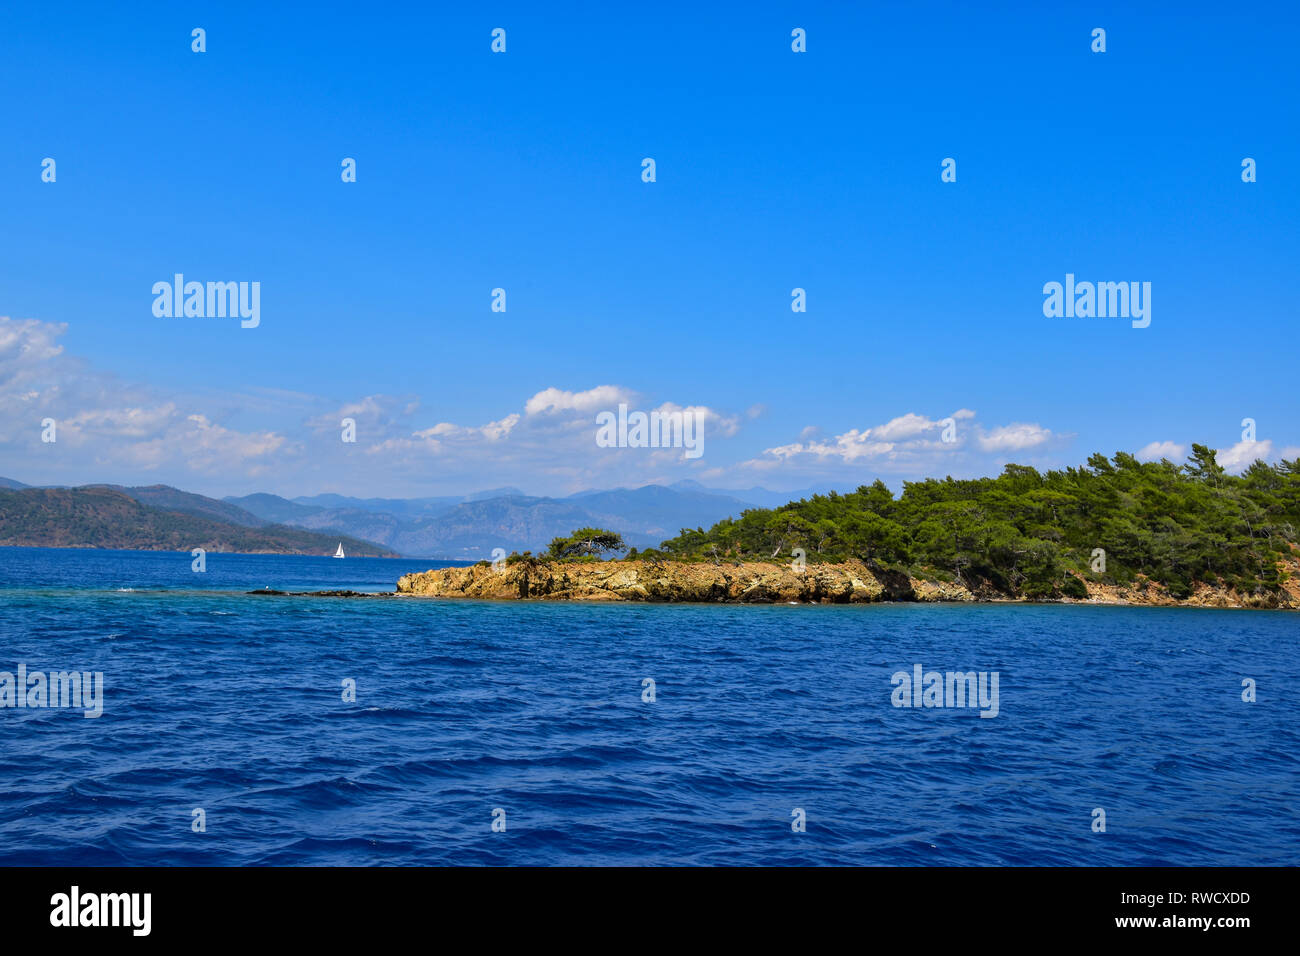 Distant sailing boat, pine trees, mountains and fluffy clouds, Gulet Boat Cruise, Mediterrean Sea, Turkey Stock Photo